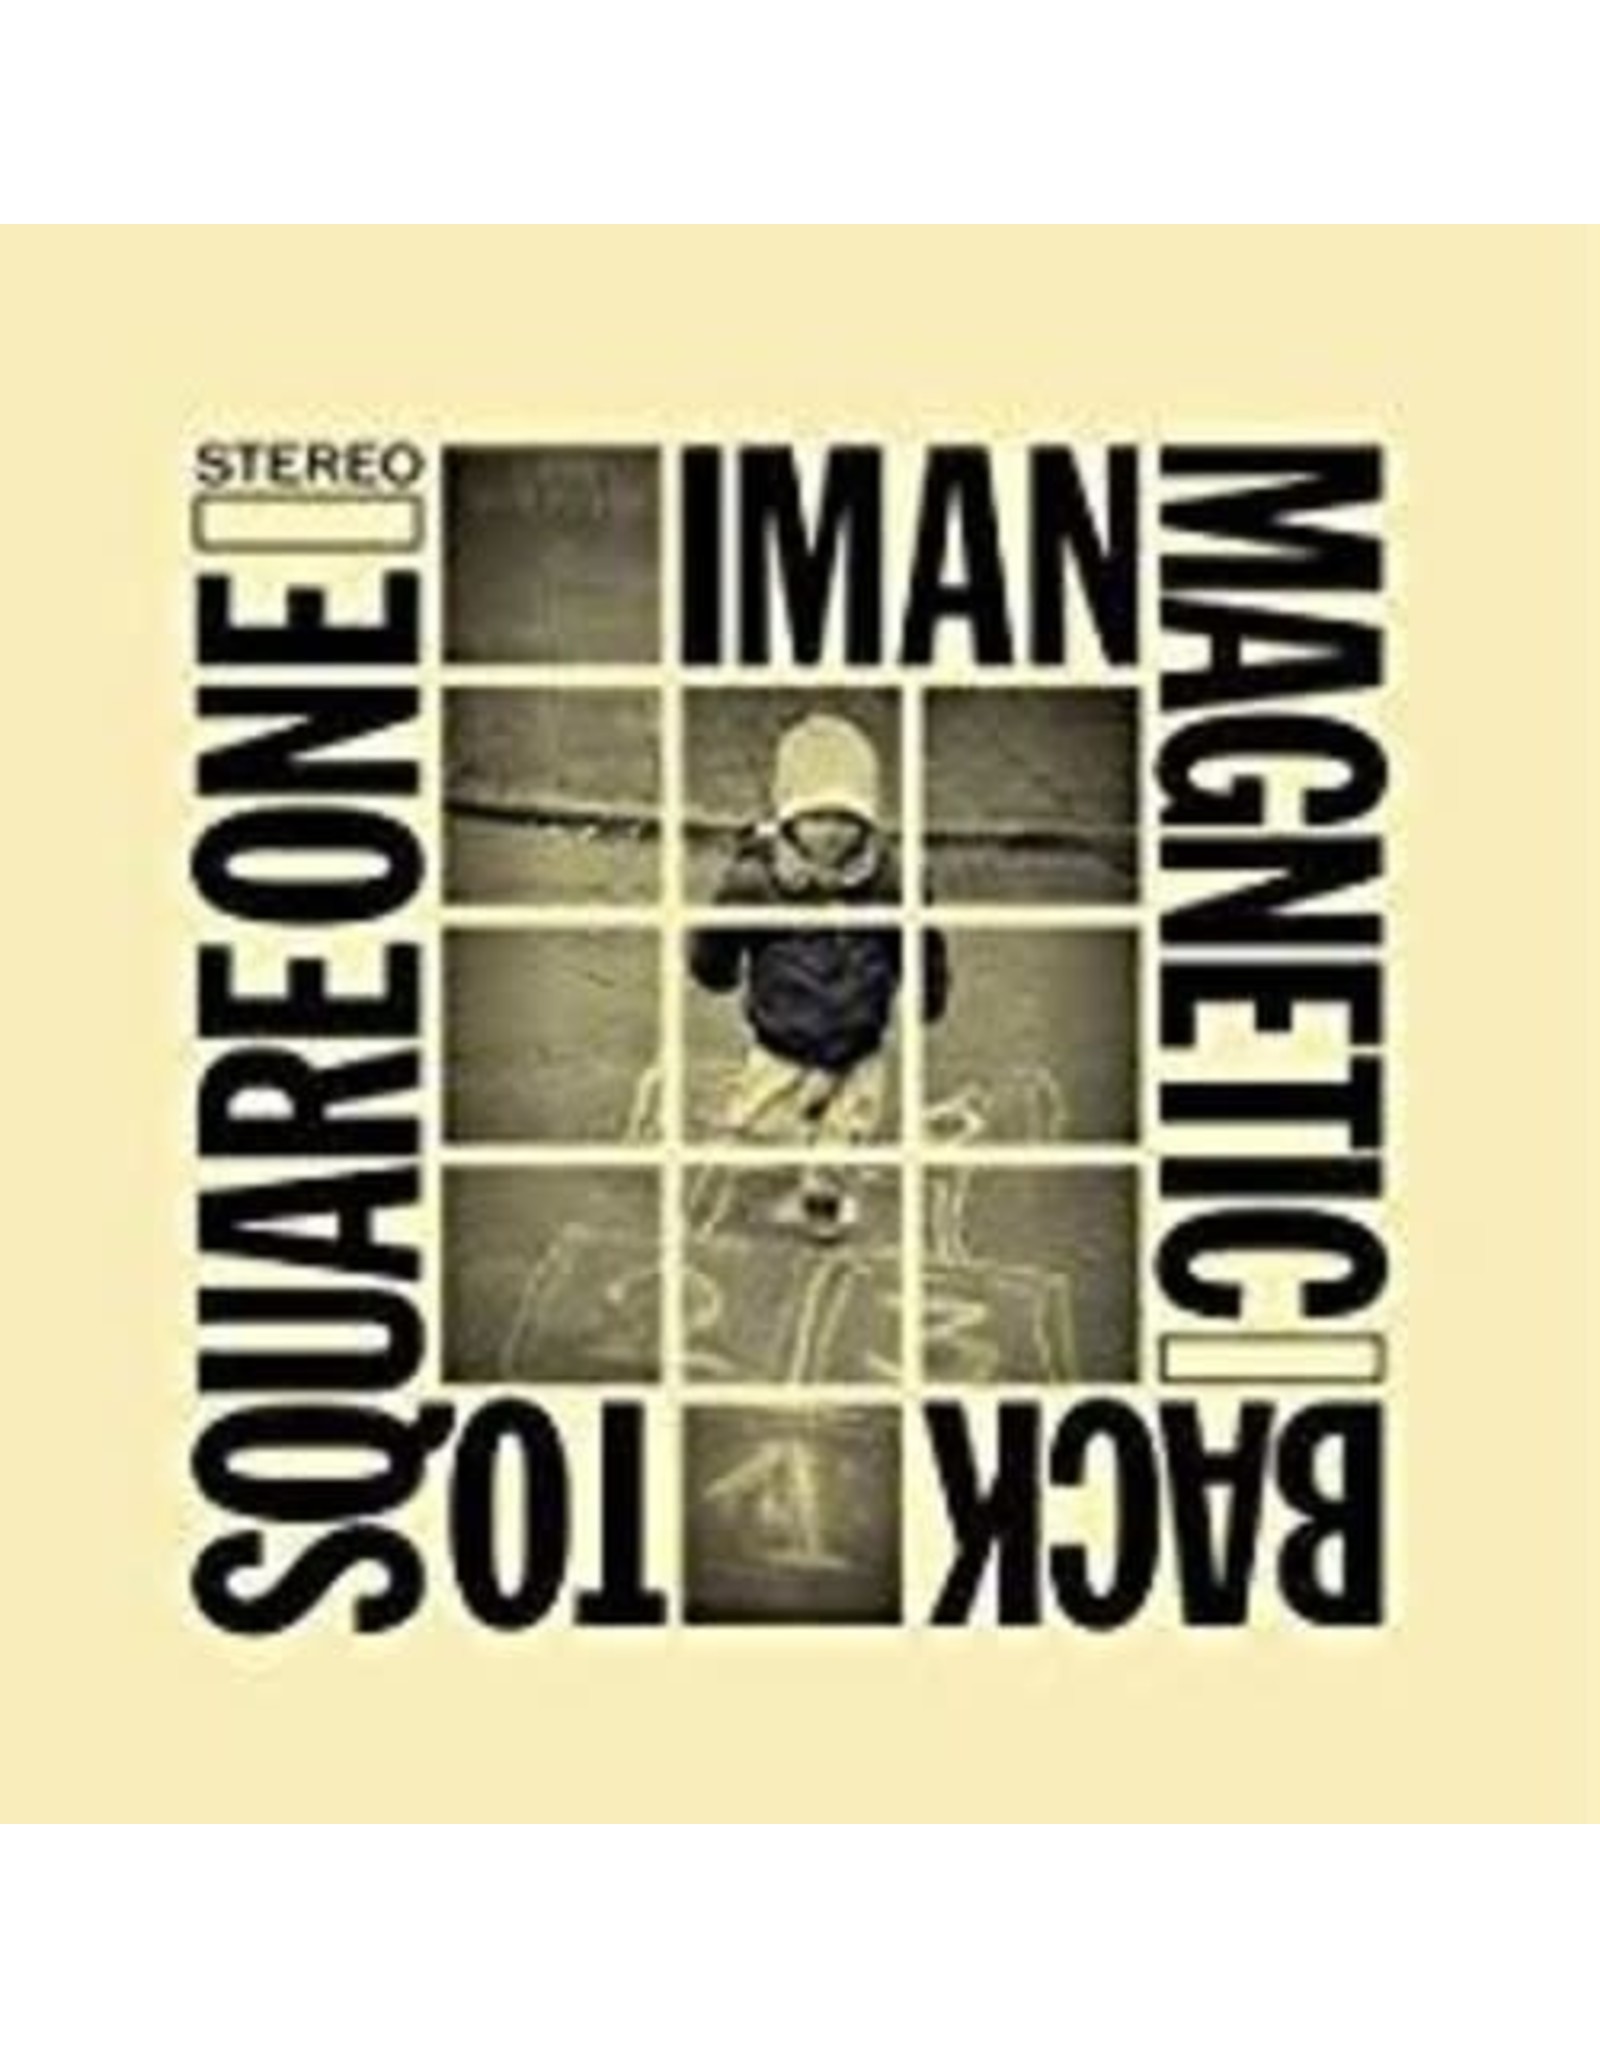 Iman Magnetic / Back To Square One